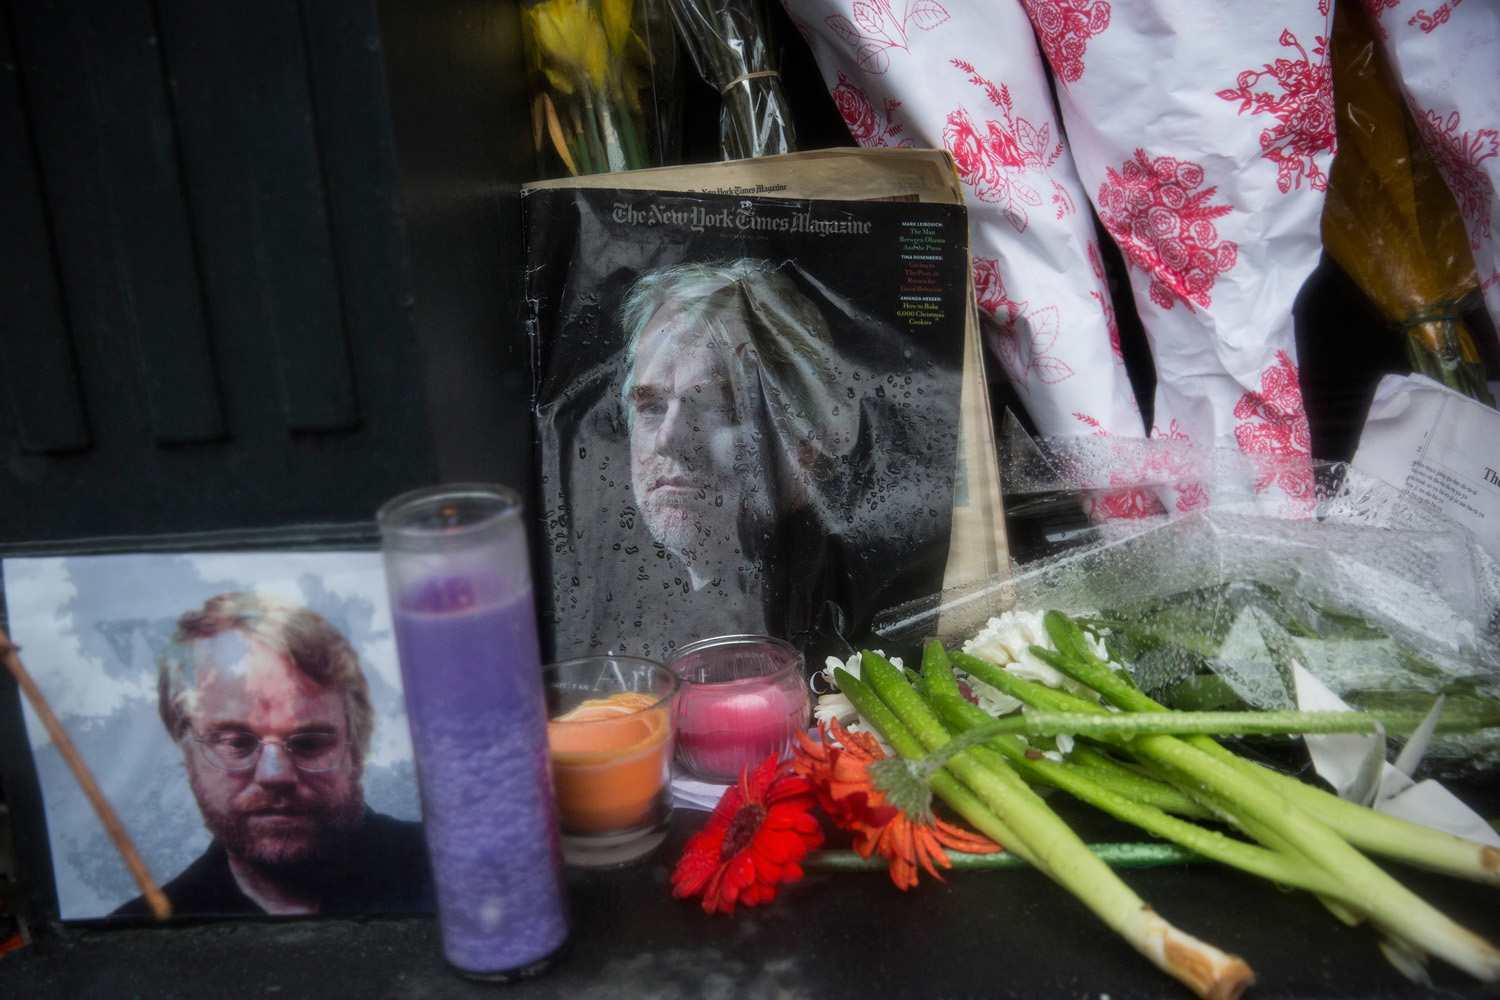 Feb. 3, 2014. A vigil of candles, flowers and portraits sits outside the apartment of actor Phillip Seymour Hoffman in the West Village neighborhood of New York City.